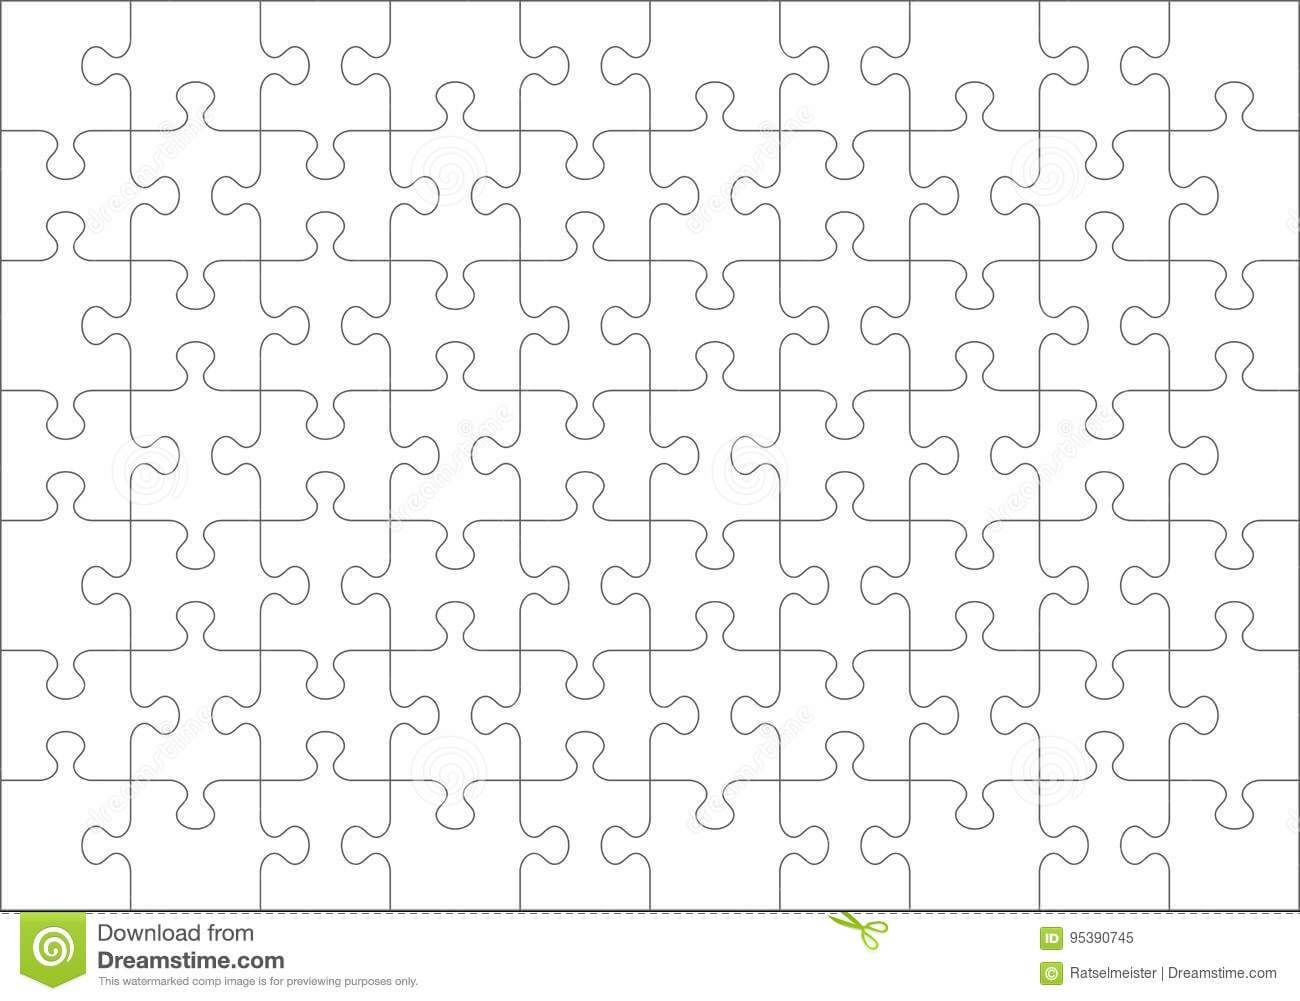 016 Jig Saw Puzzle Template Jigsaw Blank Pieces Cutting Throughout Jigsaw Puzzle Template For Word